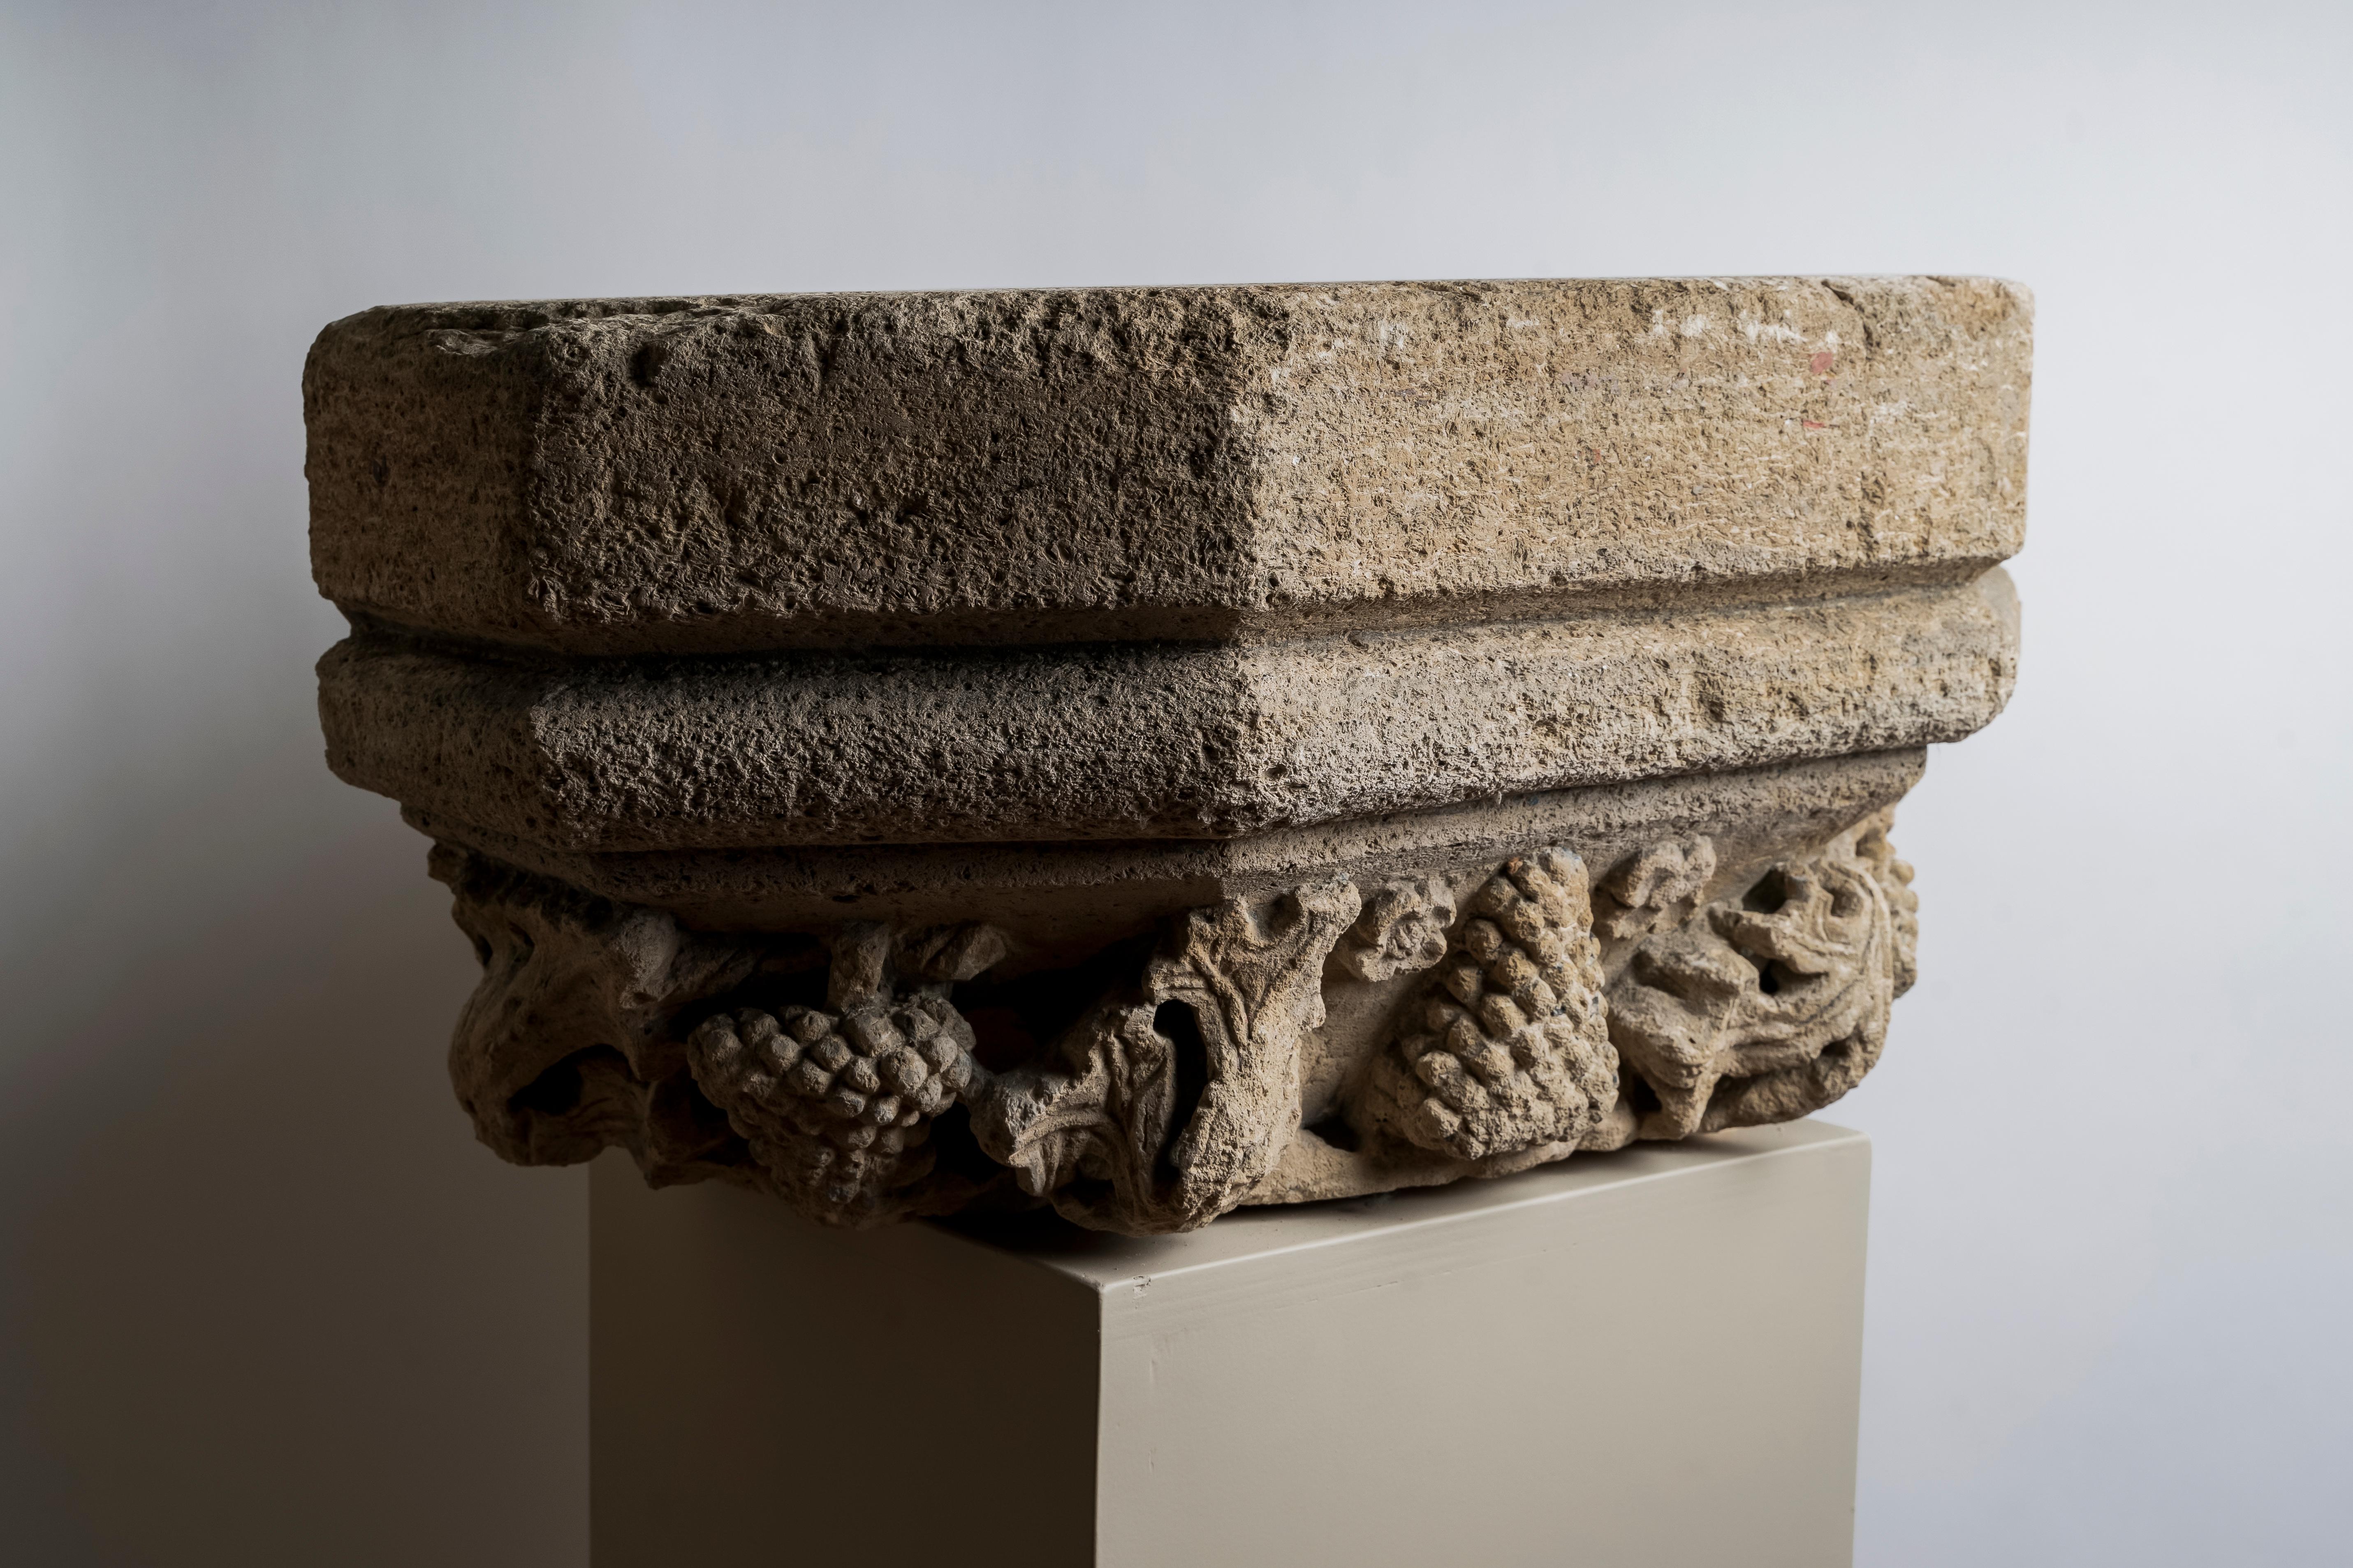 Large base of molded hexagonal pilaster in burgundy stone carved with vines, grapes and rosettes in high relief. 
Burgundy, 15th century
28 x 63 x 30 cm
Provenance : collection Demotte

This very large pilaster base decorated with vines leaves